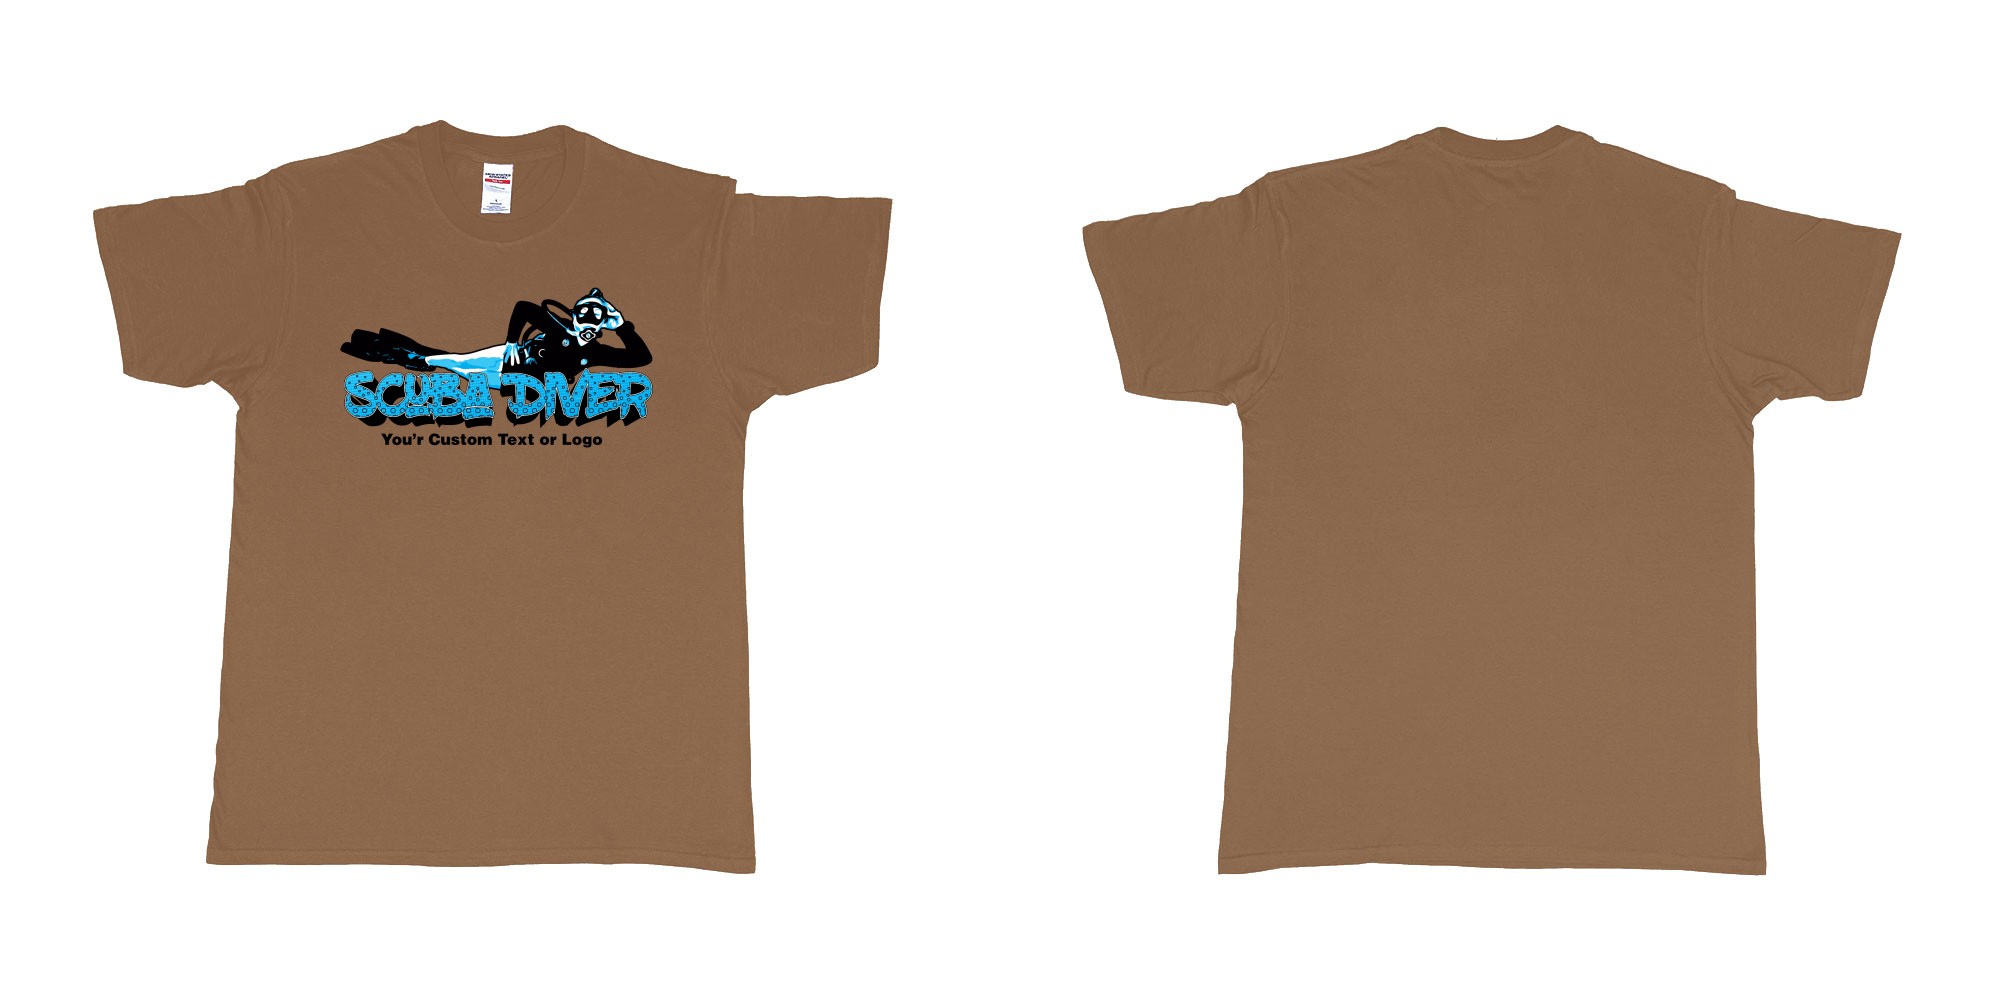 Custom tshirt design relaxed scuba diver in fabric color chestnut choice your own text made in Bali by The Pirate Way